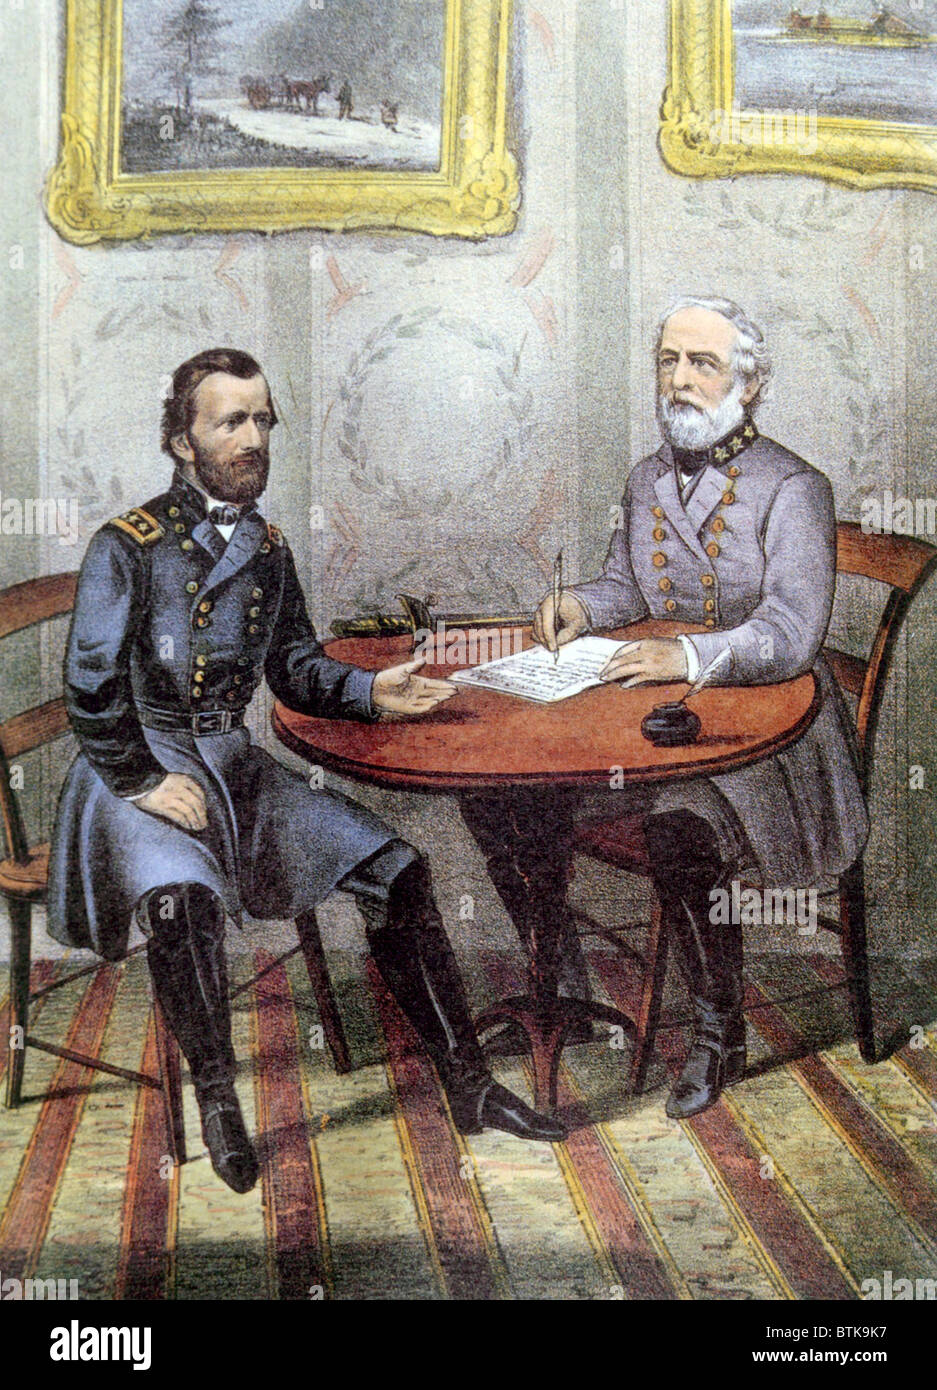 Confederate General Robert E. Lee surrenders to Union General Ulysses S. Grant at Appomattox Court House, Virginia, April 9, 1865, lithograph by Currier & Ives, 1865 Stock Photo